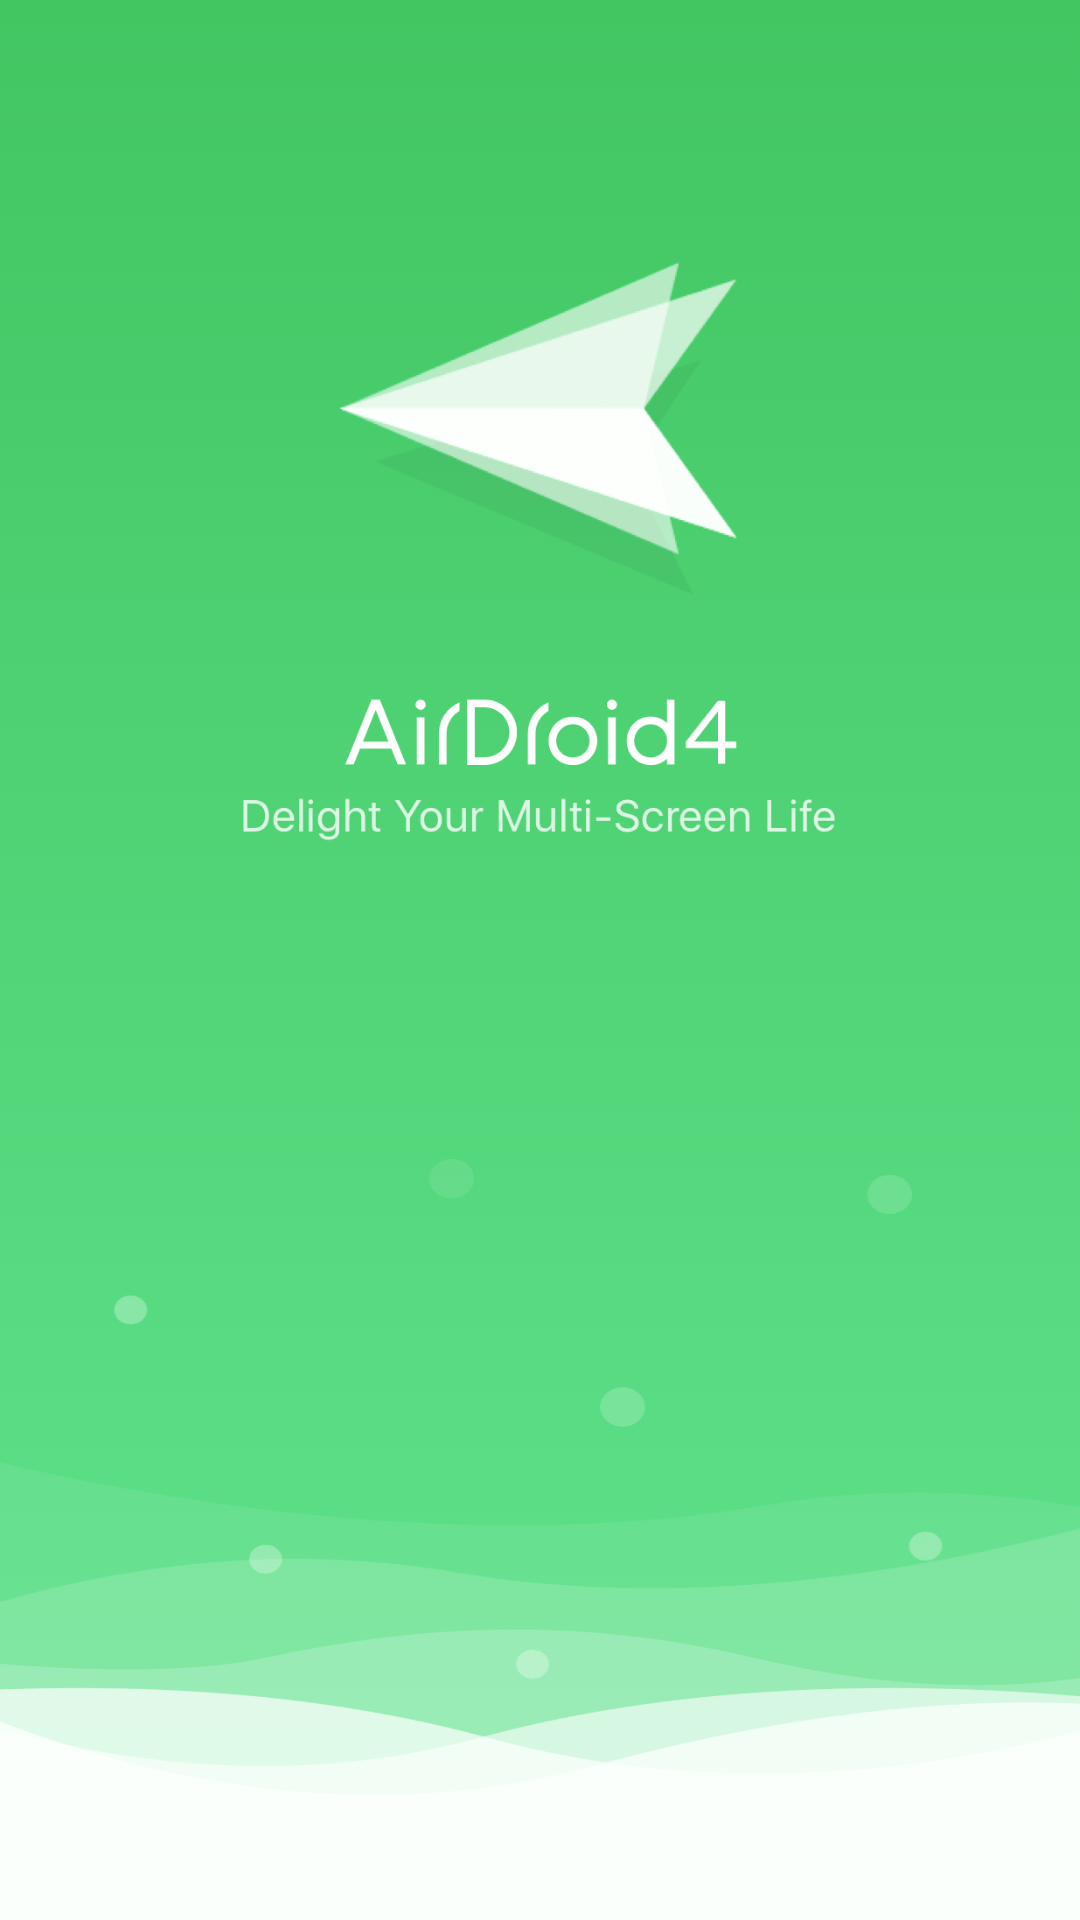 Transfer files wirelessly with AirDroid